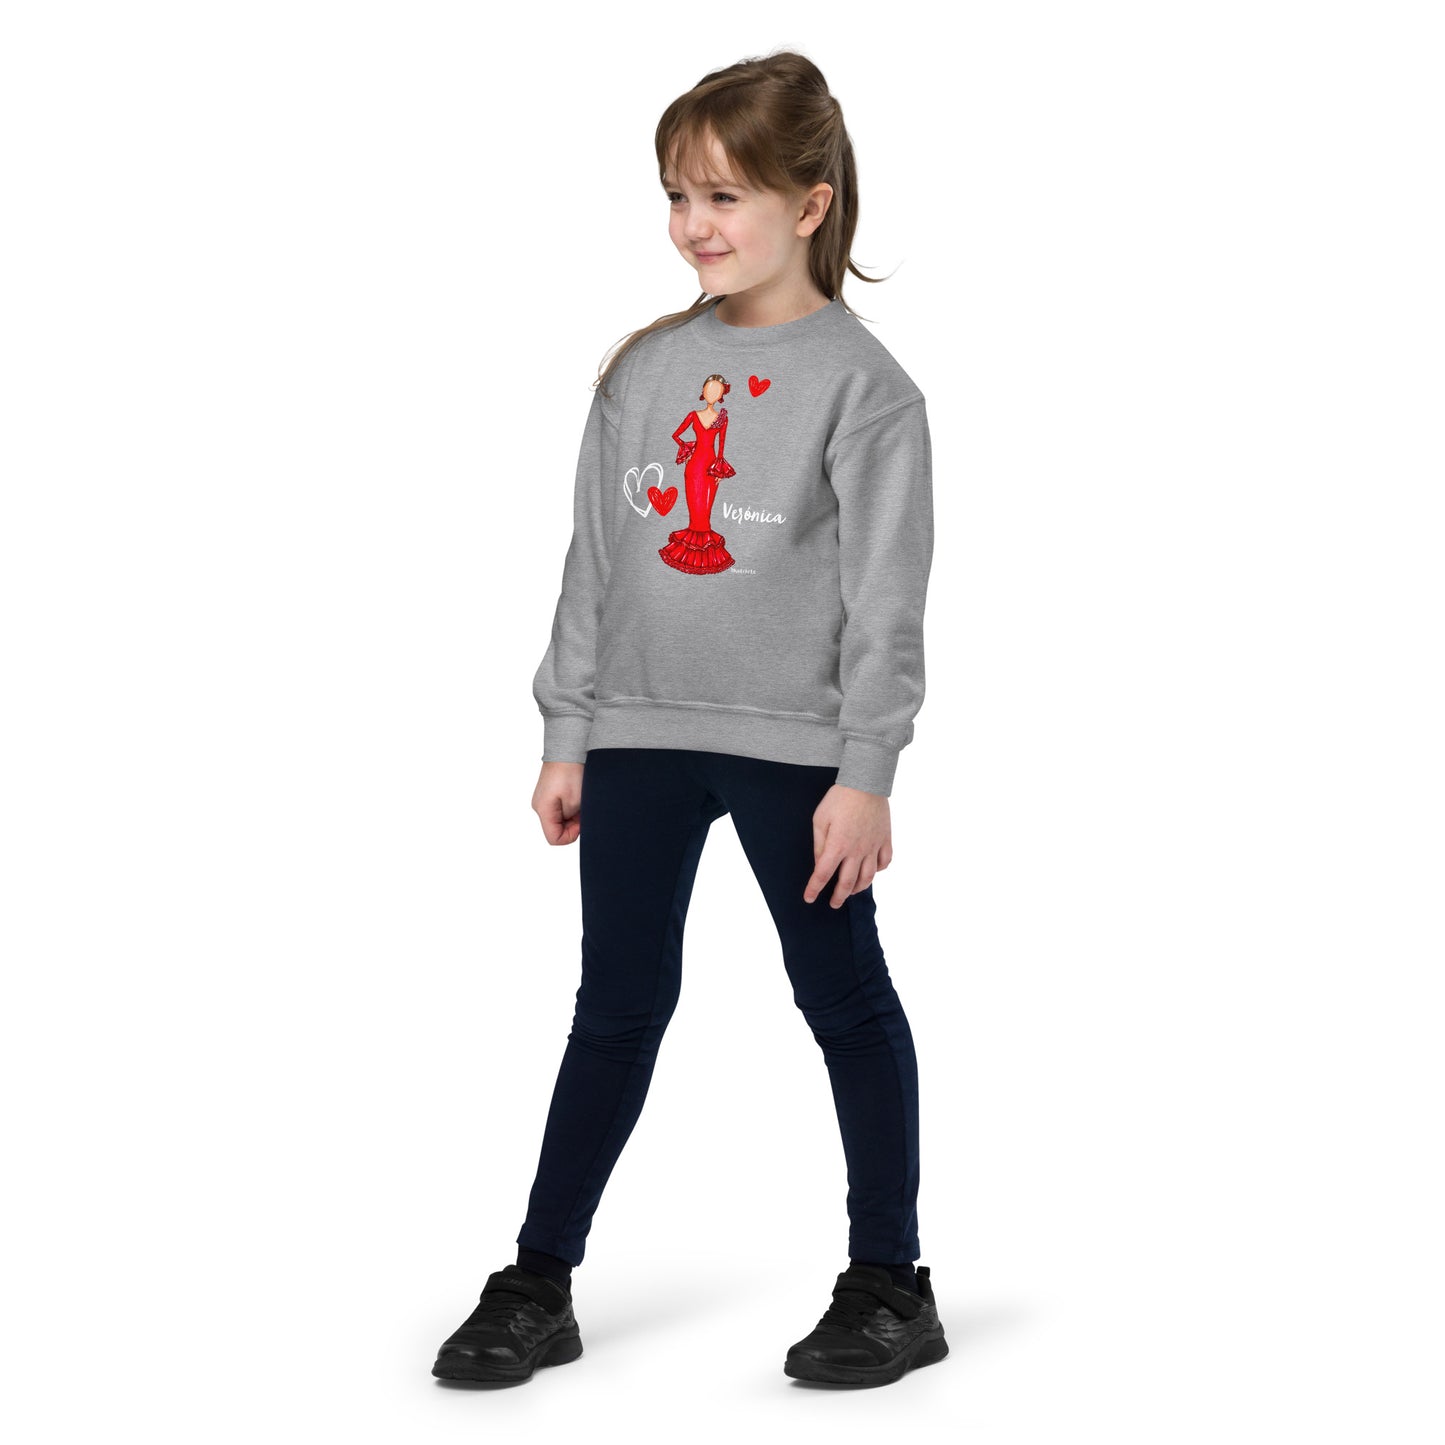 a little girl wearing a sweatshirt with a red dress on it